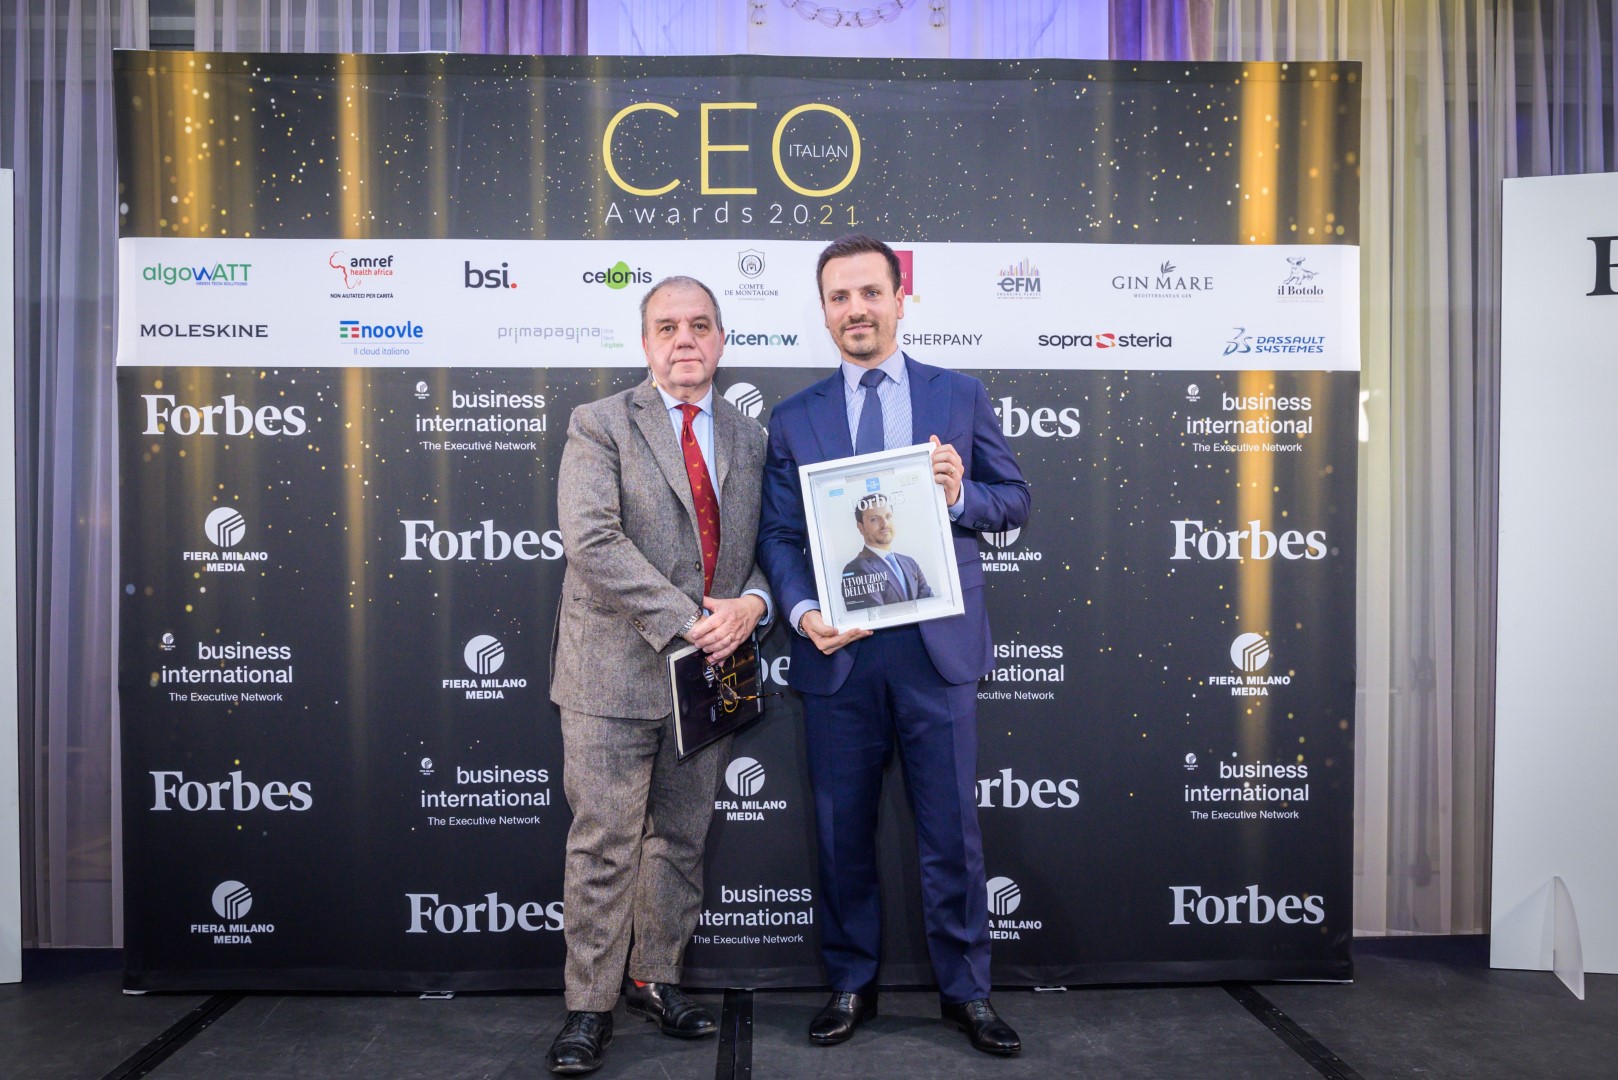 CLAUDIO ROMANI AWARDED AMONG THE 20 TOP MANAGERS OF THE CEO ITALIAN AWARDS 2021